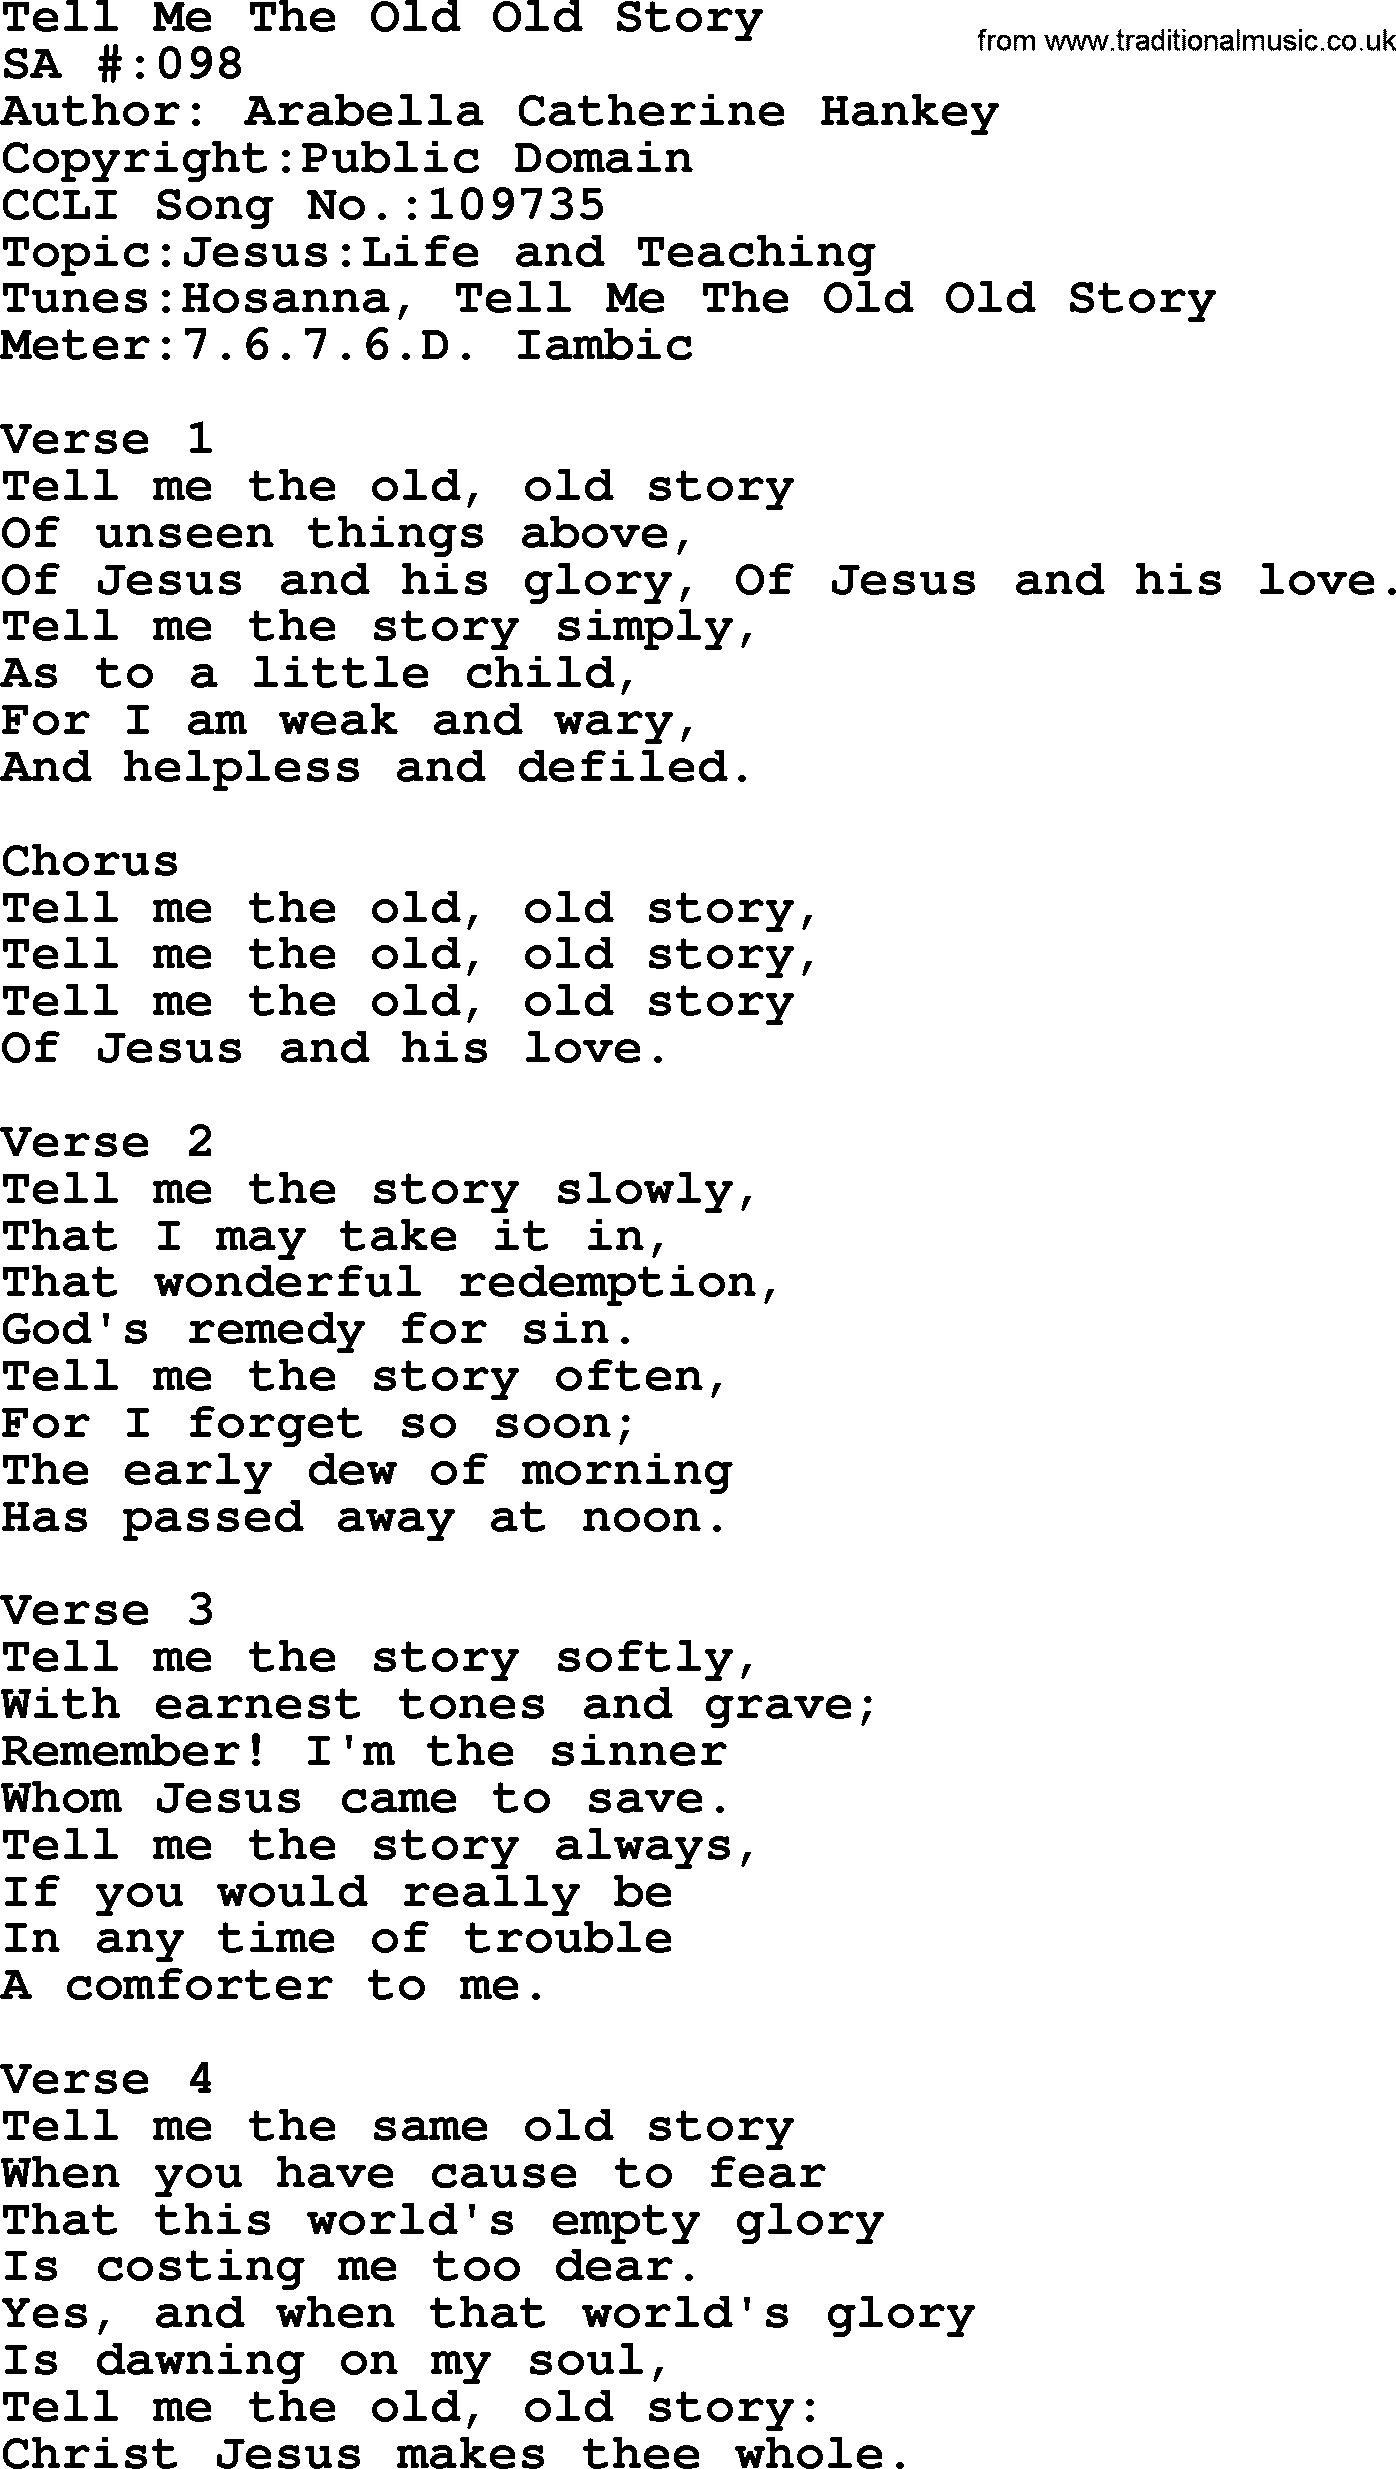 Salvation Army Hymnal, title: Tell Me The Old Old Story, with lyrics and PDF,